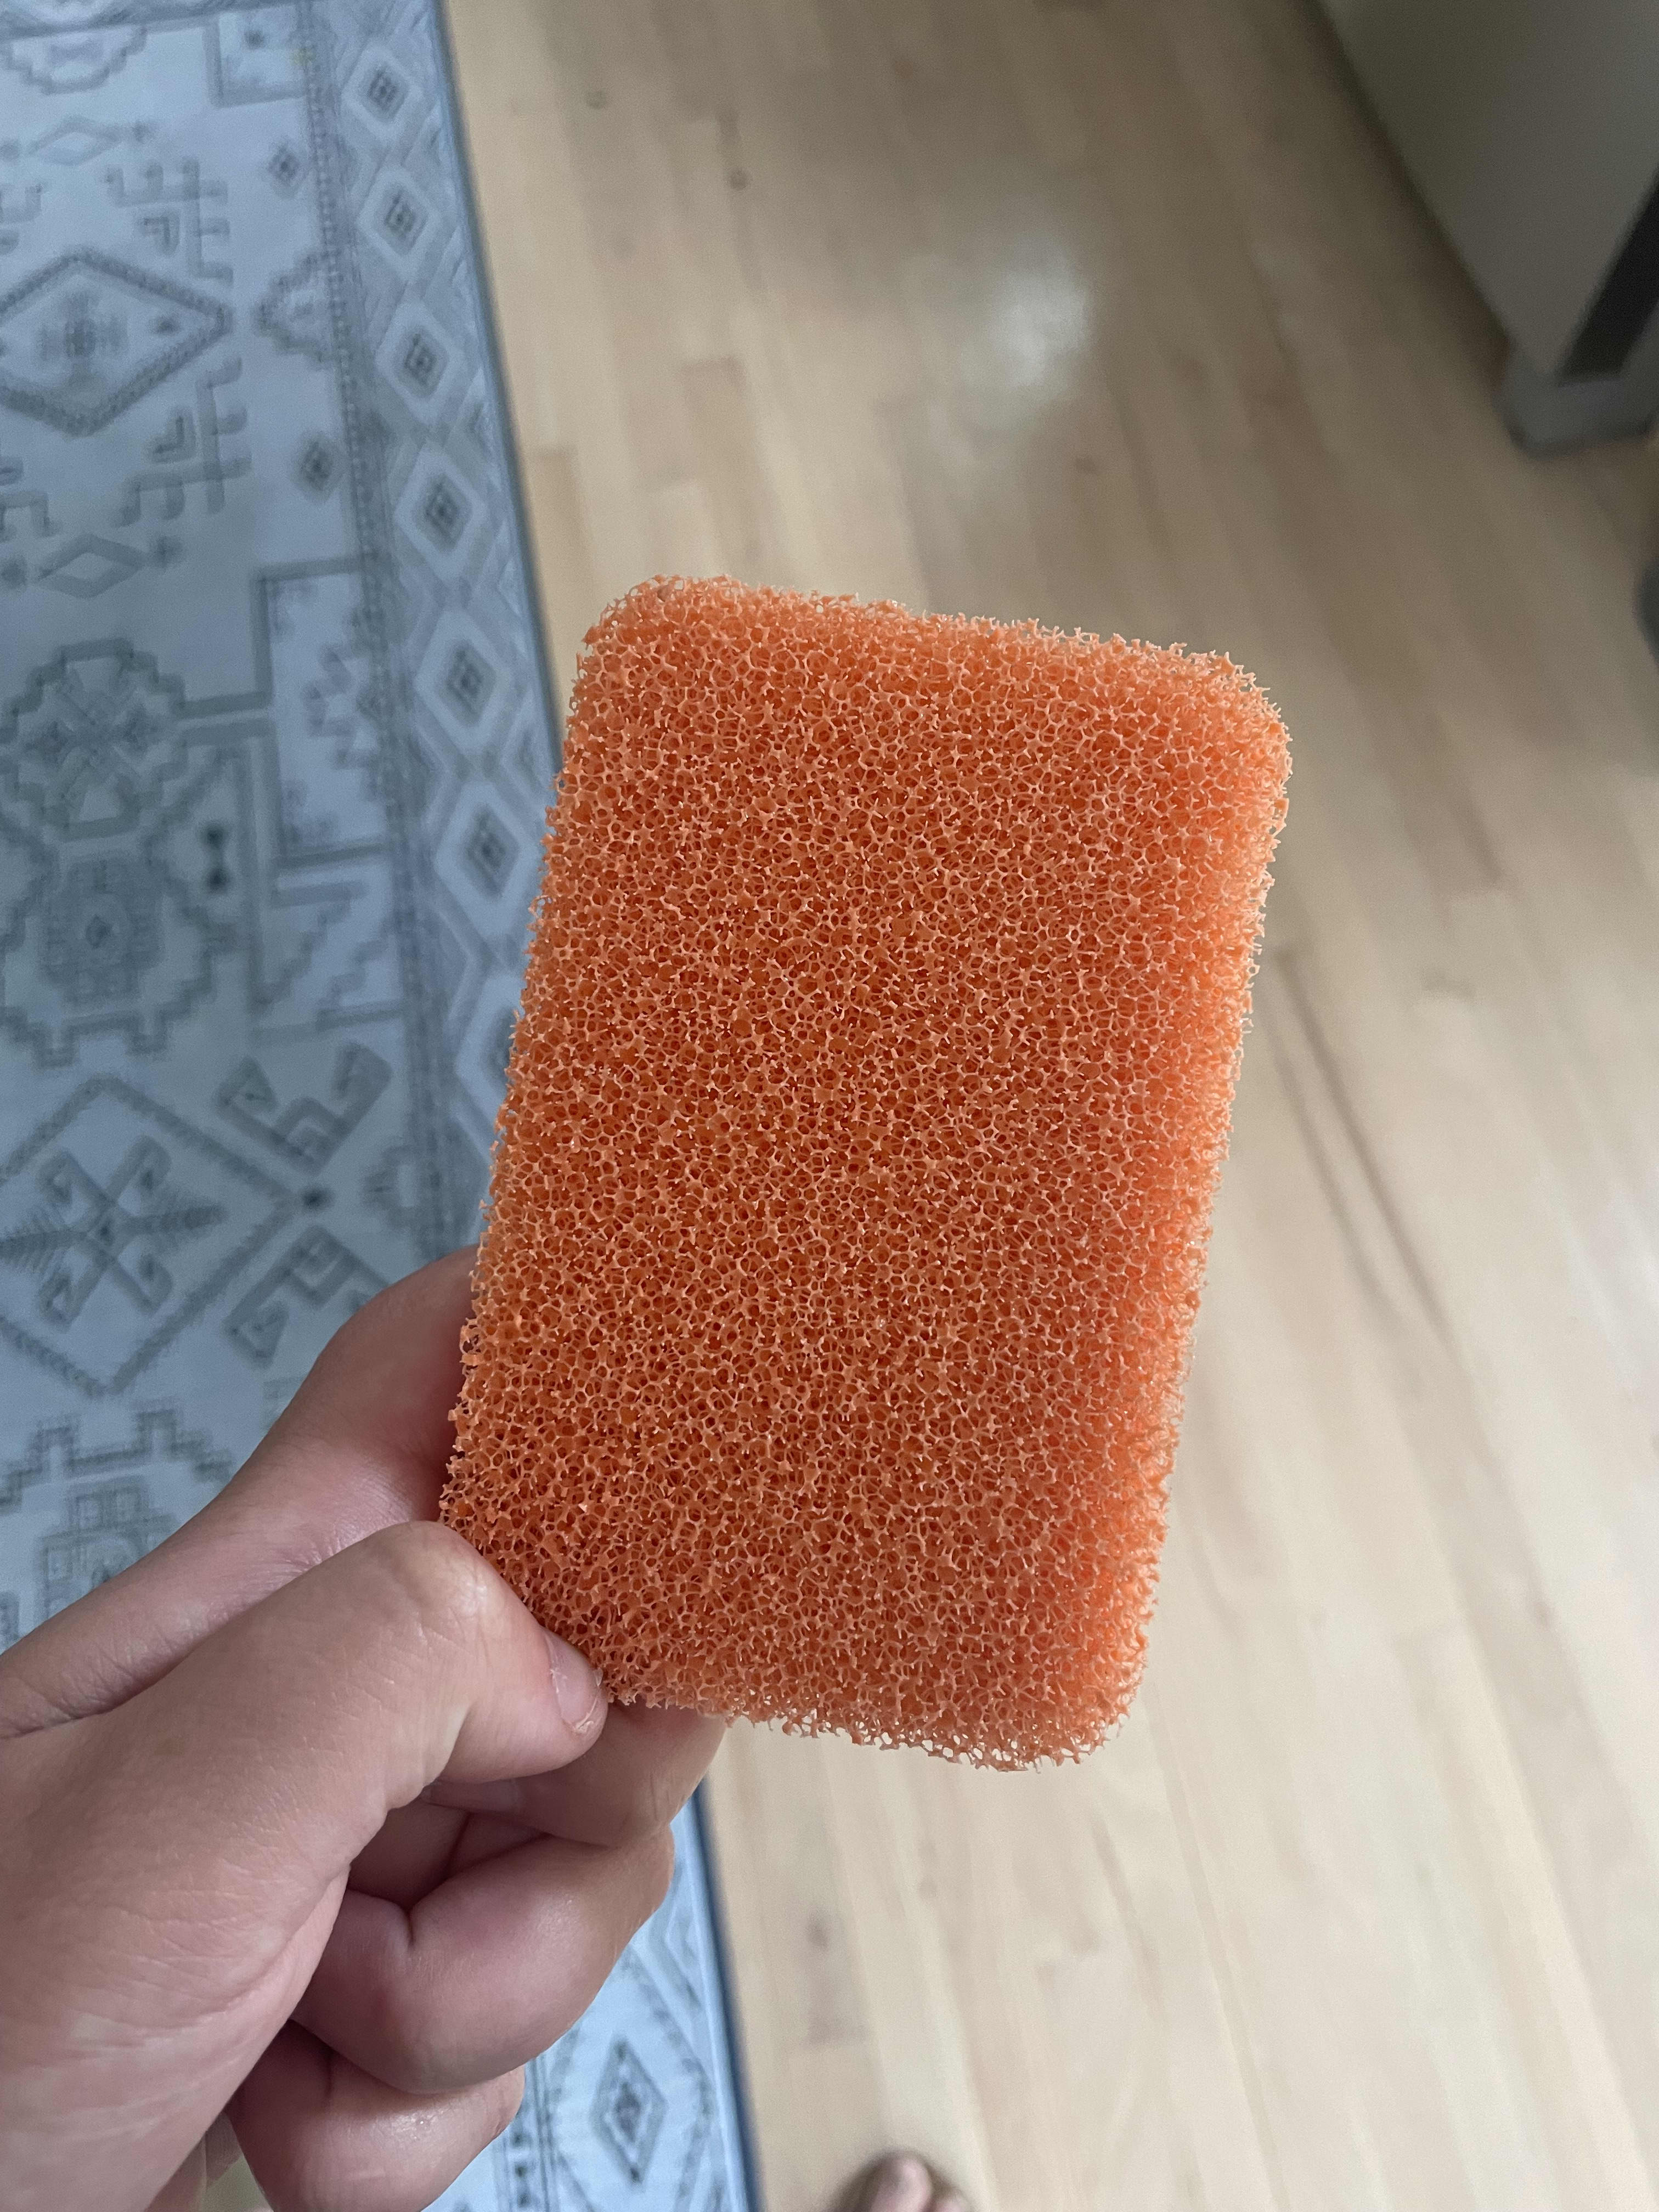 Grand Fusion Peachy Clean Sponges, Kitchen Cleaning Supplies with Fresh Peachy Scent, Dish Scrubber 2 Pack